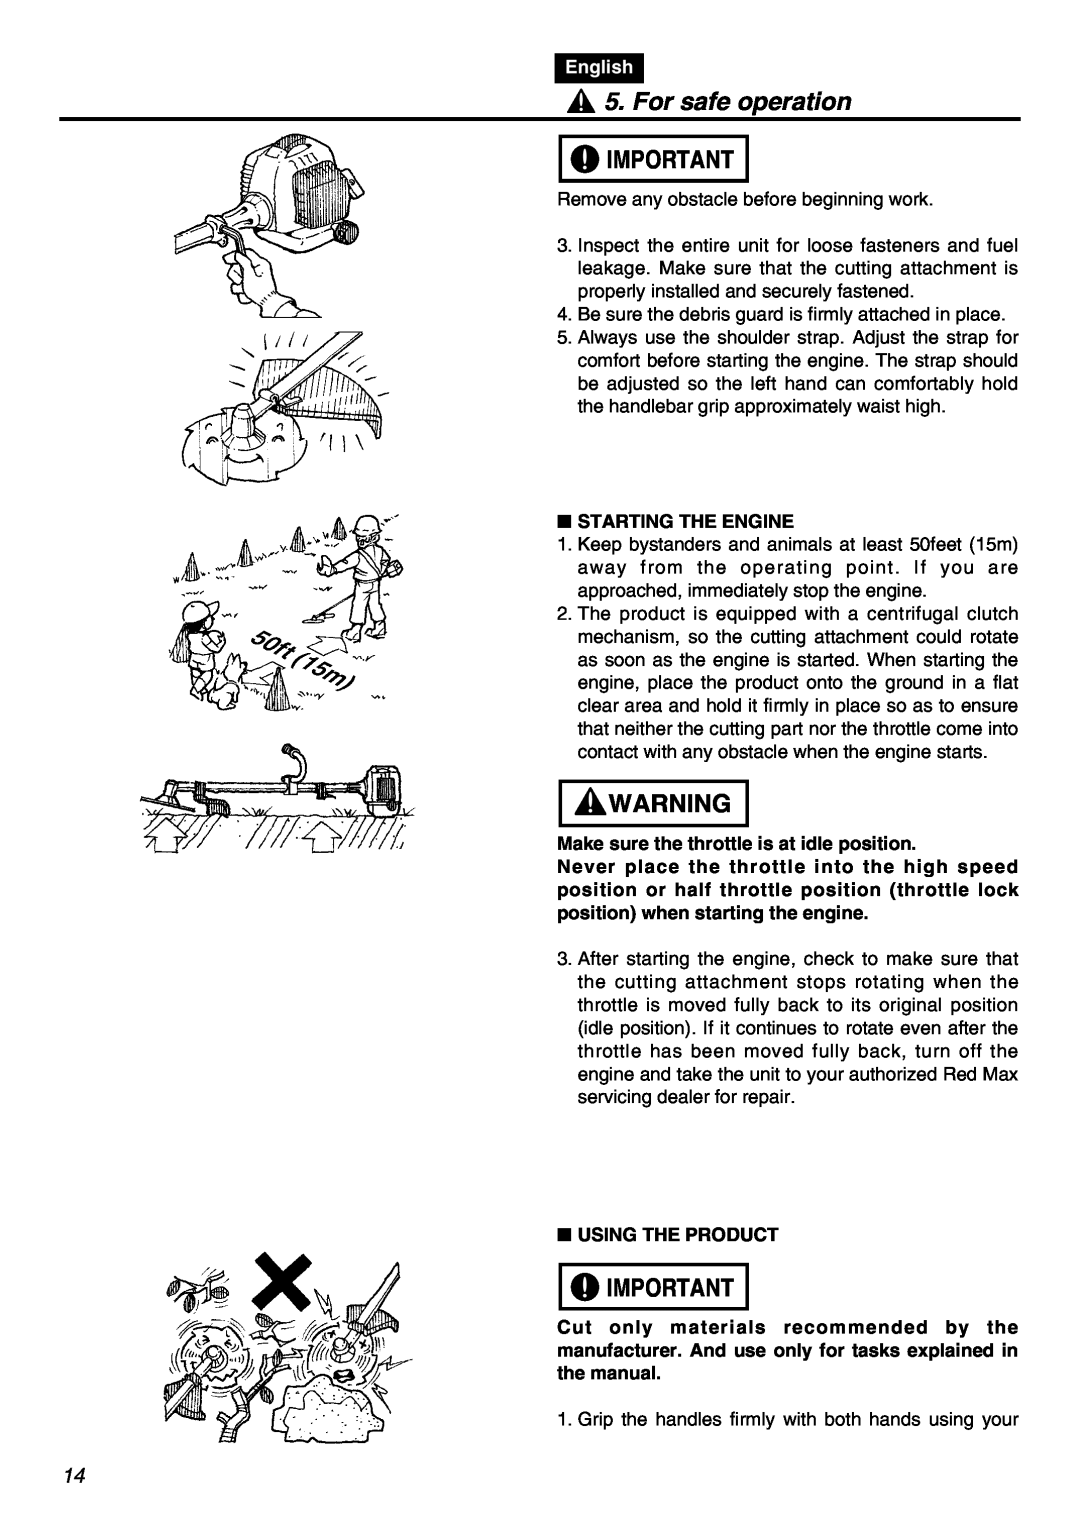 Zenoah EXZ2401S manual For safe operation, English, Starting The Engine, Make sure the throttle is at idle position 